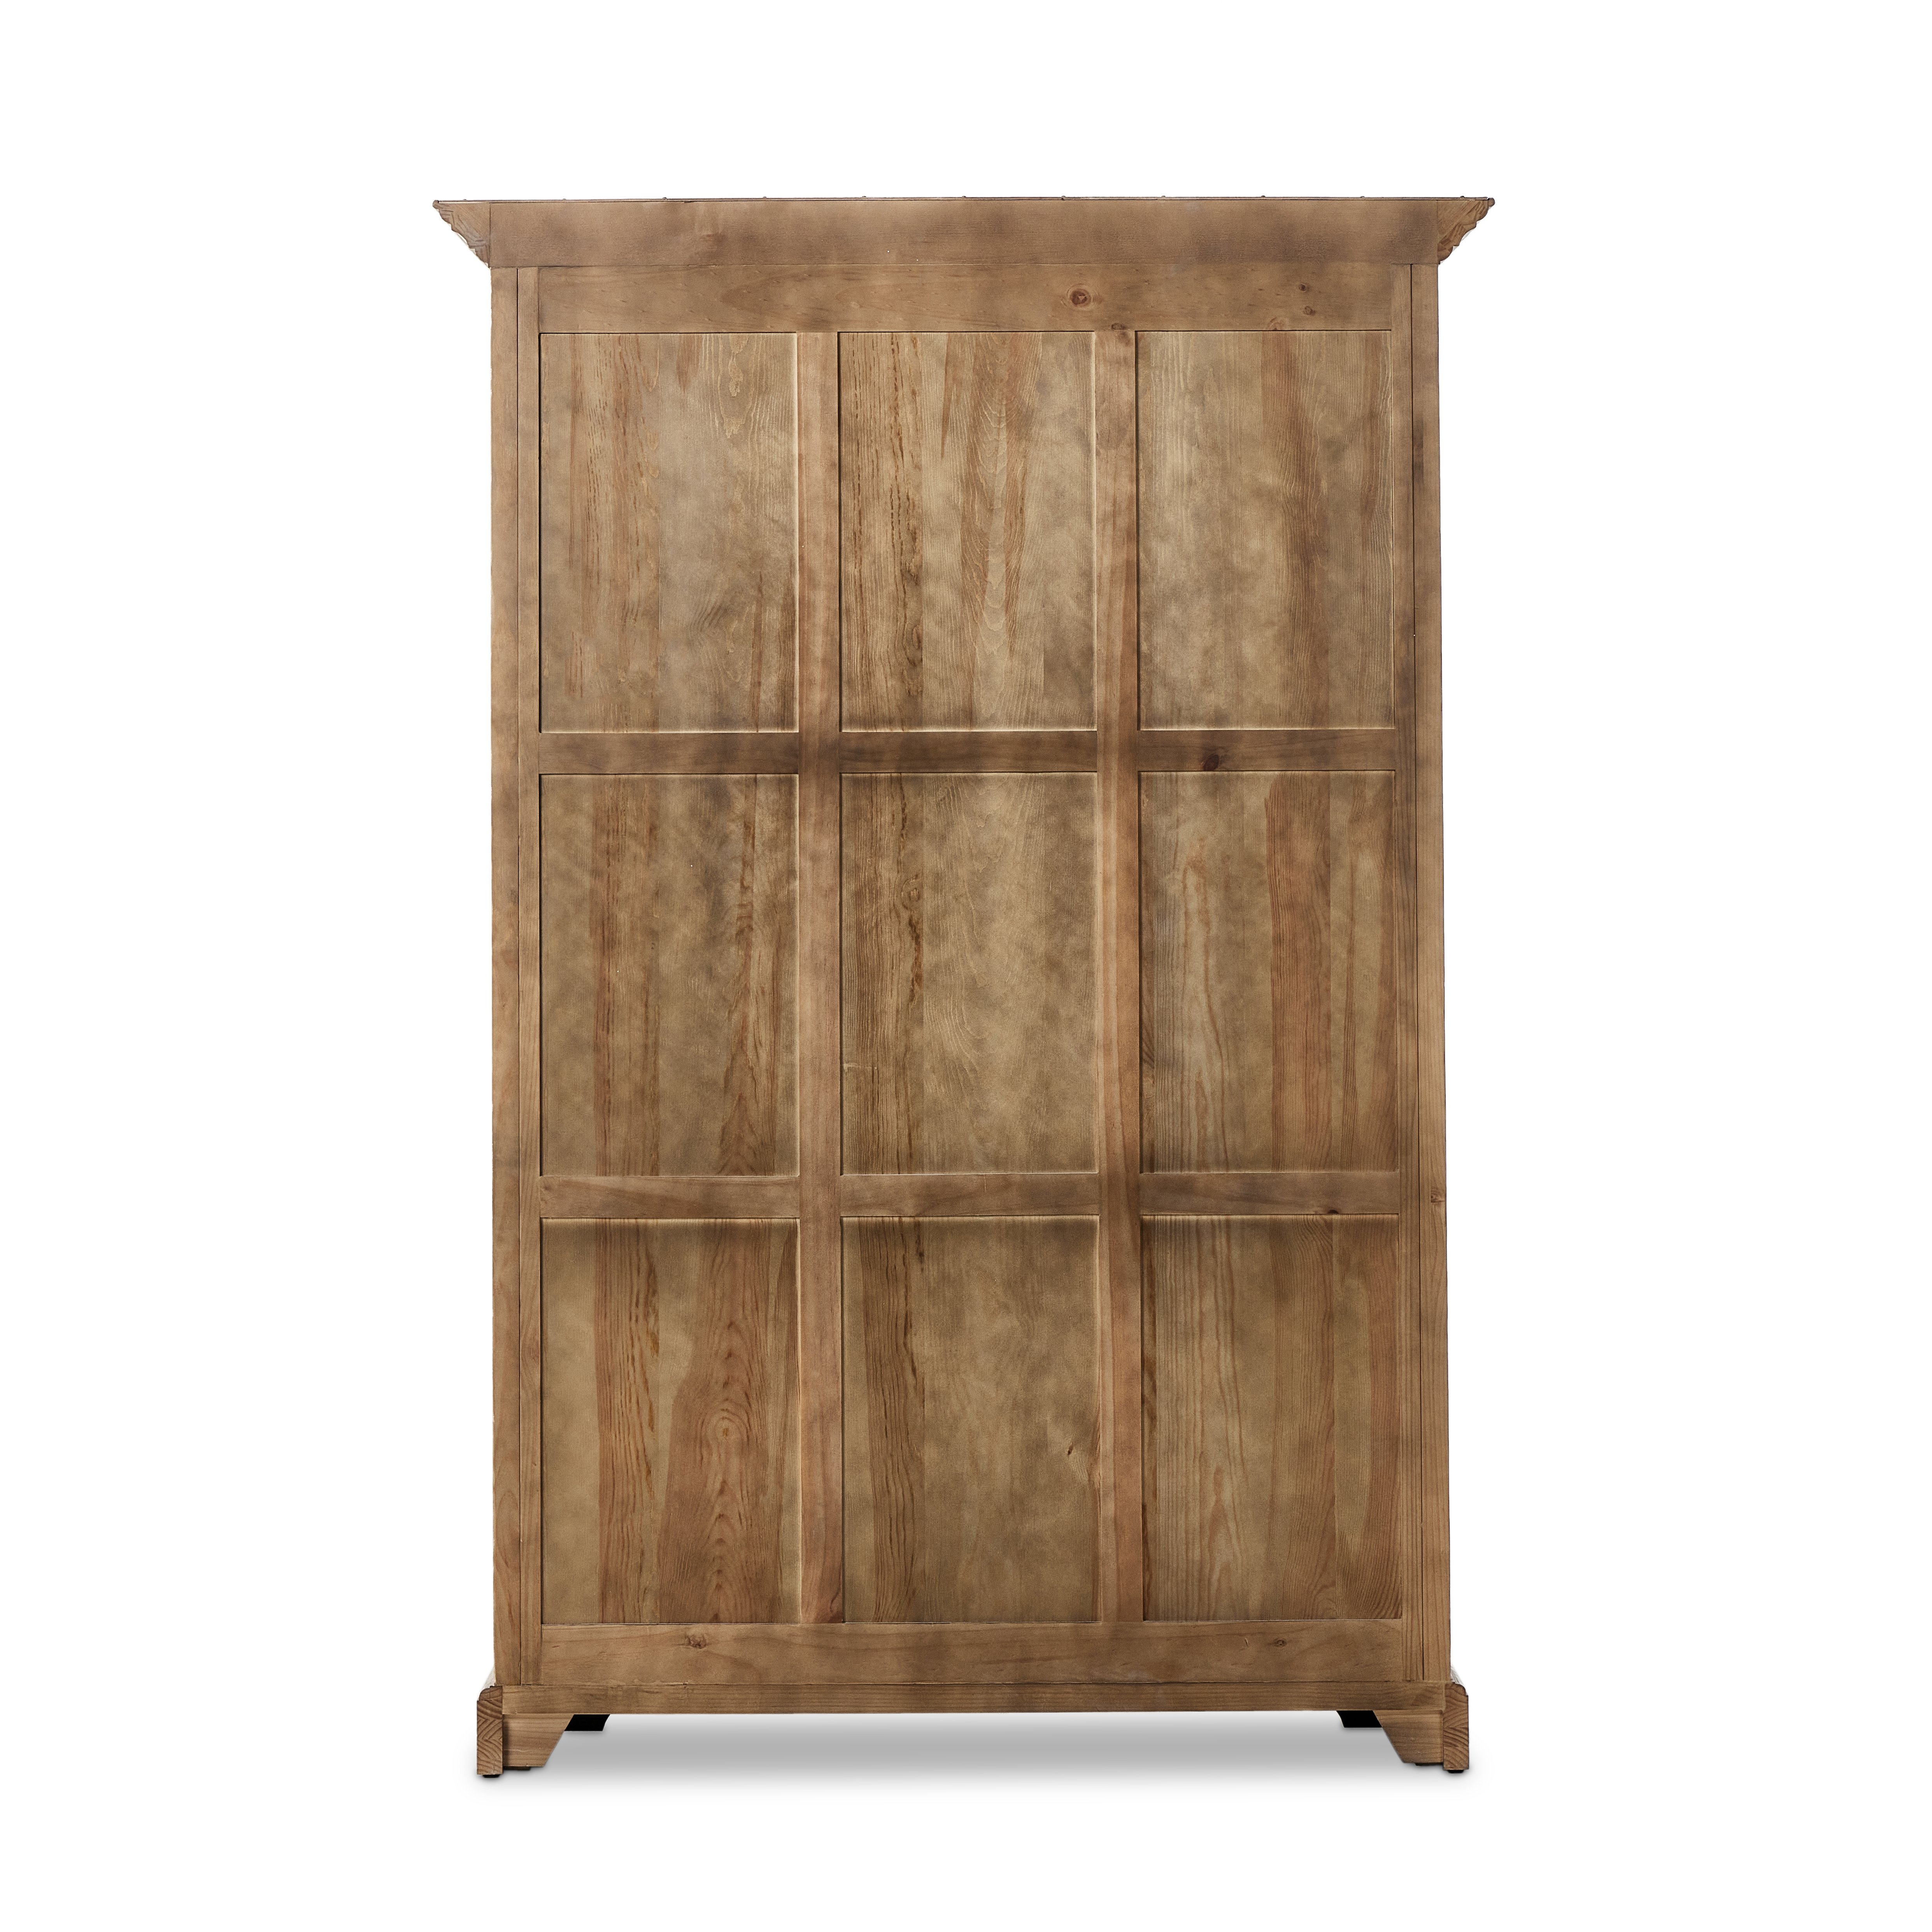 The "please No More Doors" Cabinet-Ntrl - Image 6